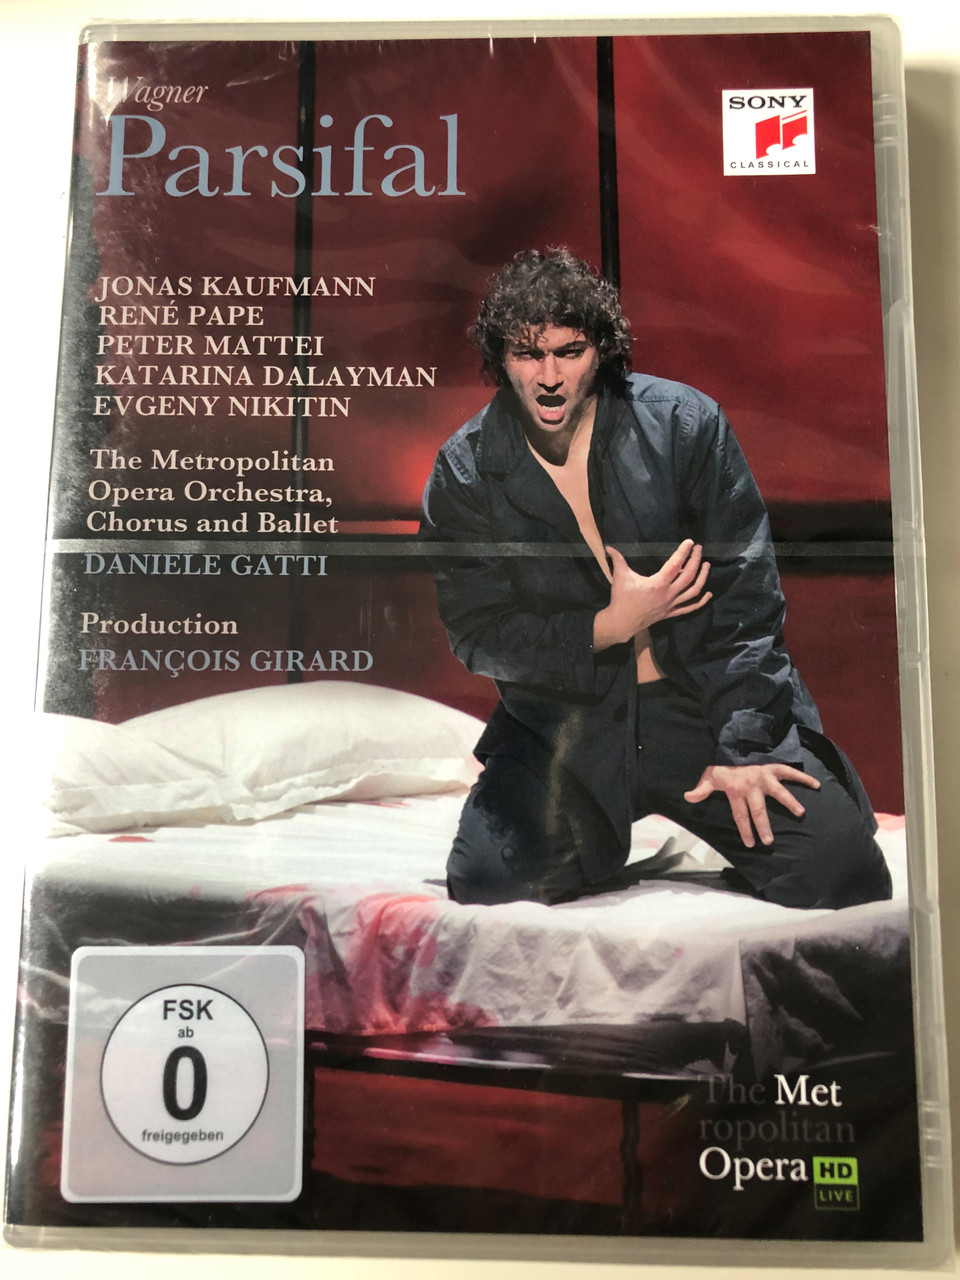 Wagner - Parsifal 2 DVD SET The Metropolitan Opera Orchestra, Chorus and  Ballet / Directed by Barbara Willis Sweete / Production Francois Girard /  Conducted by Daniele Gatti - bibleinmylanguage